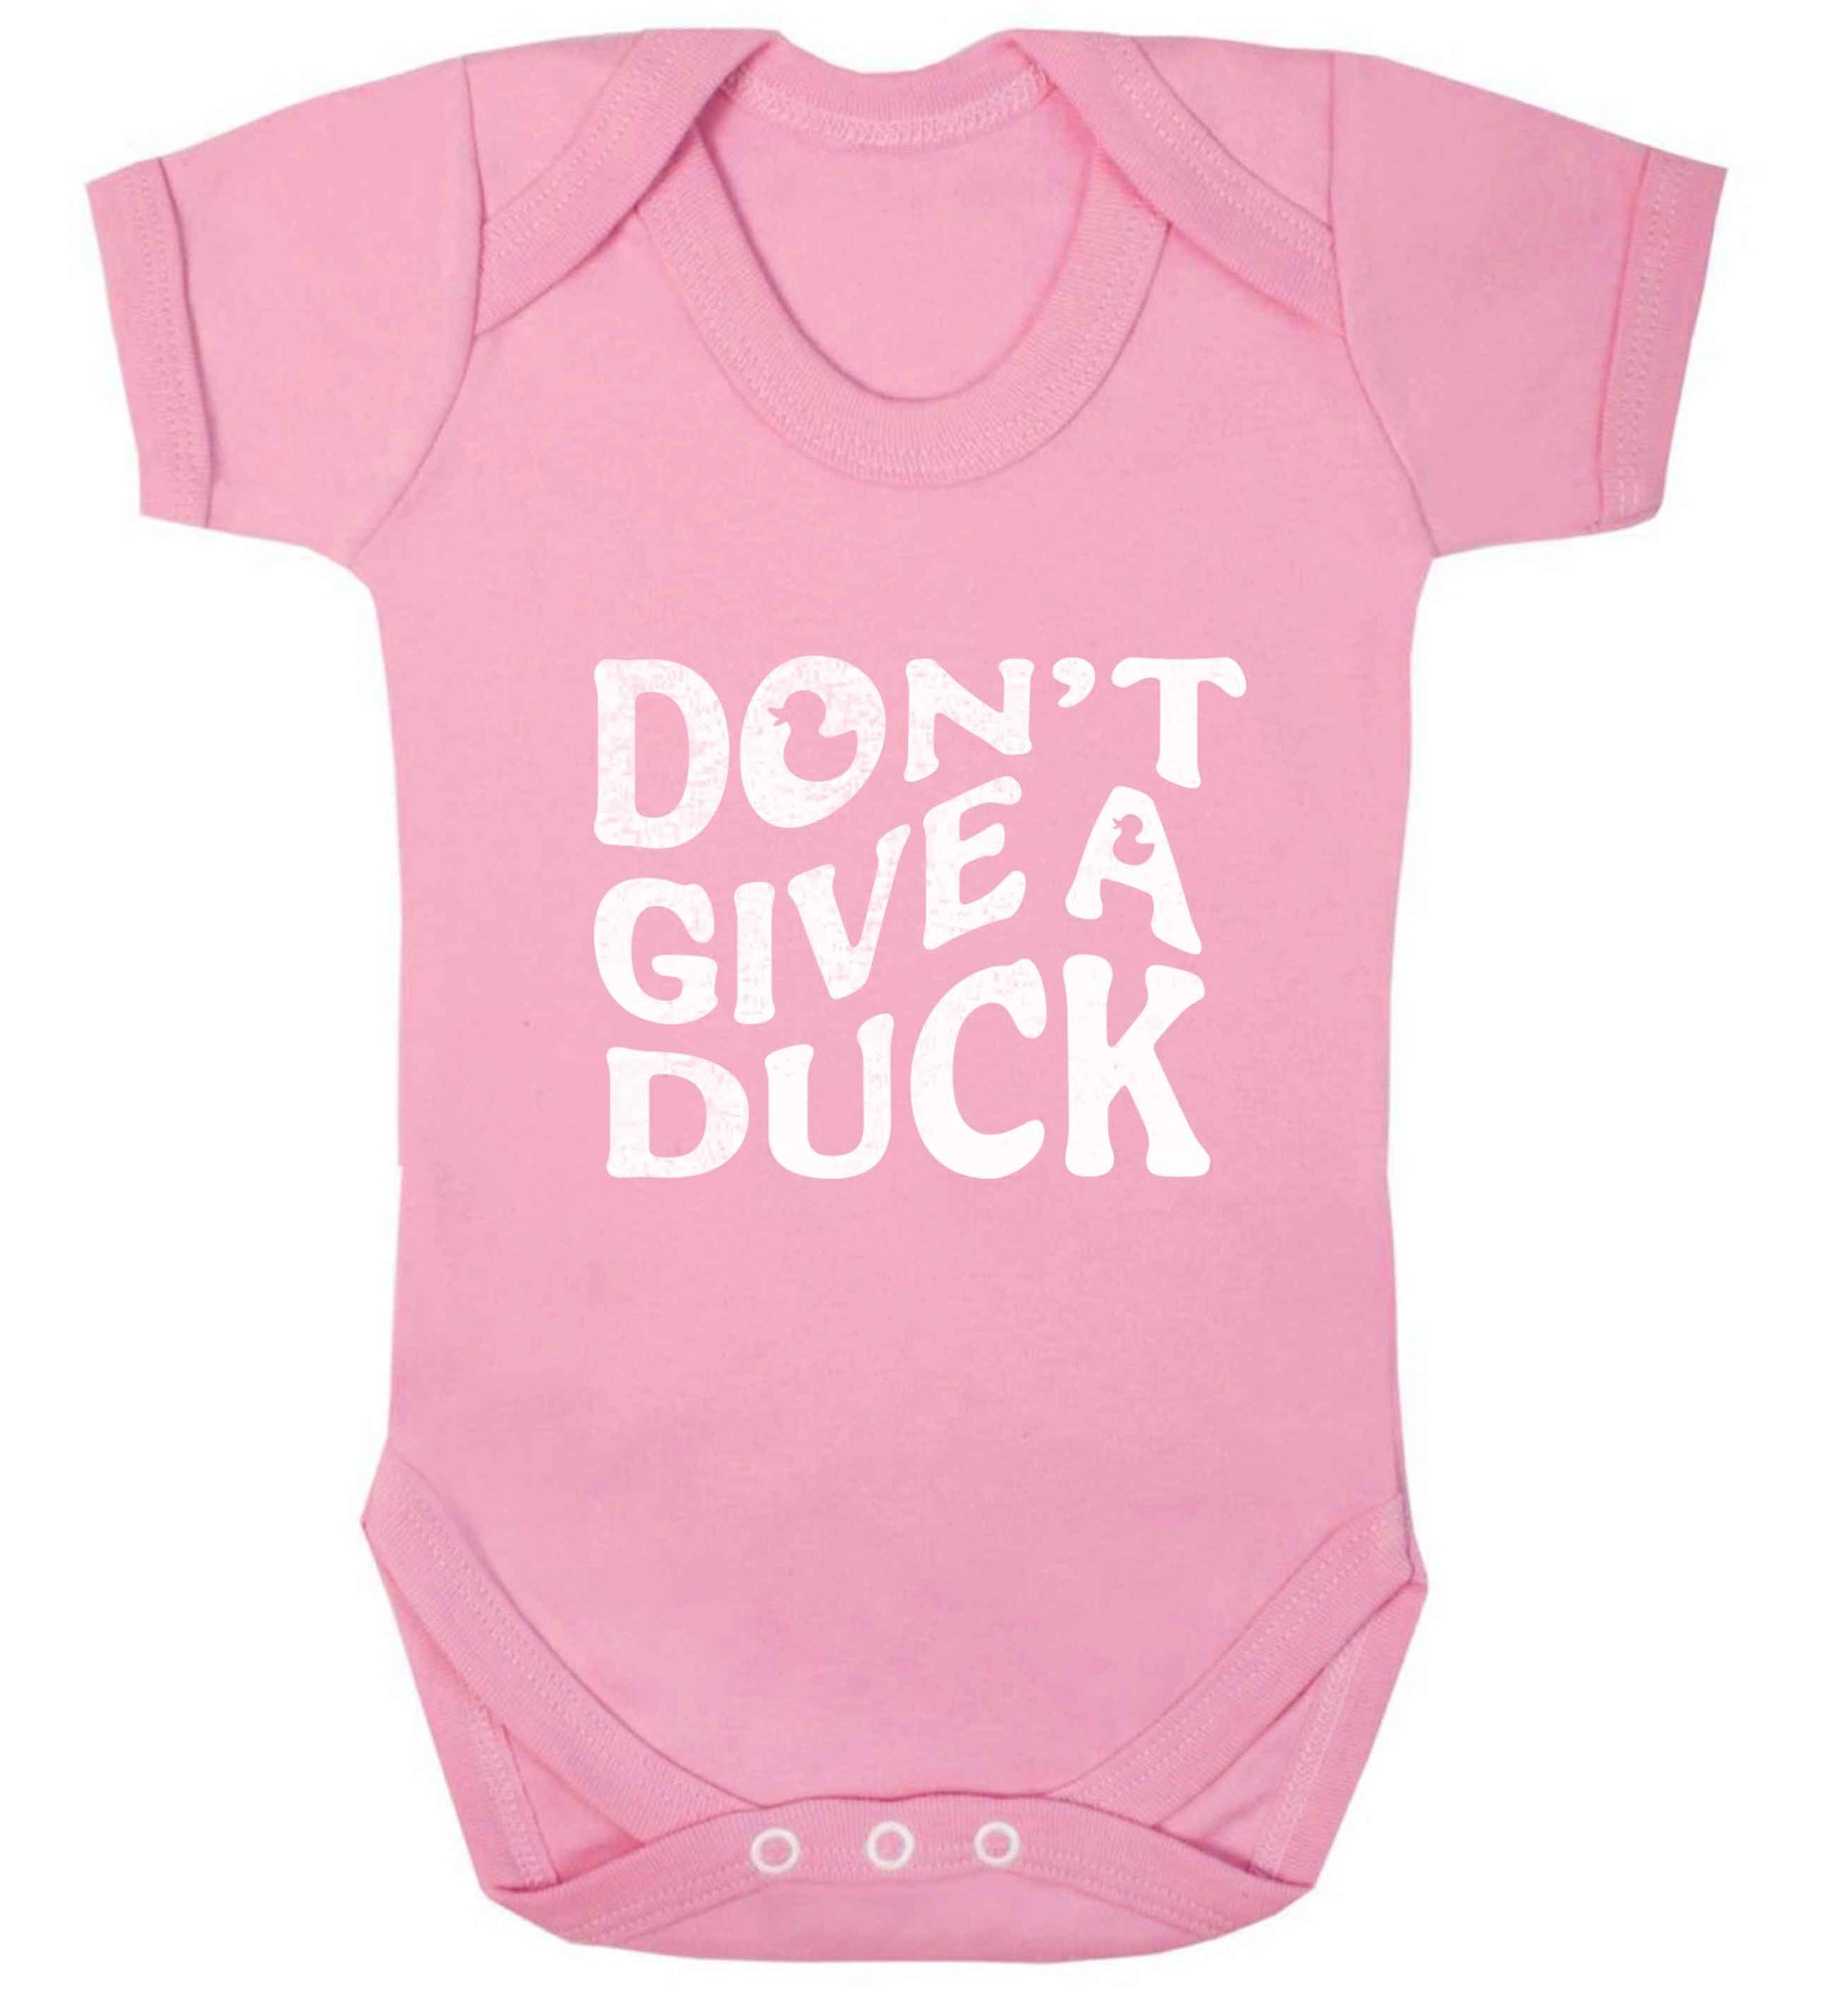 Don't give a duck baby vest pale pink 18-24 months